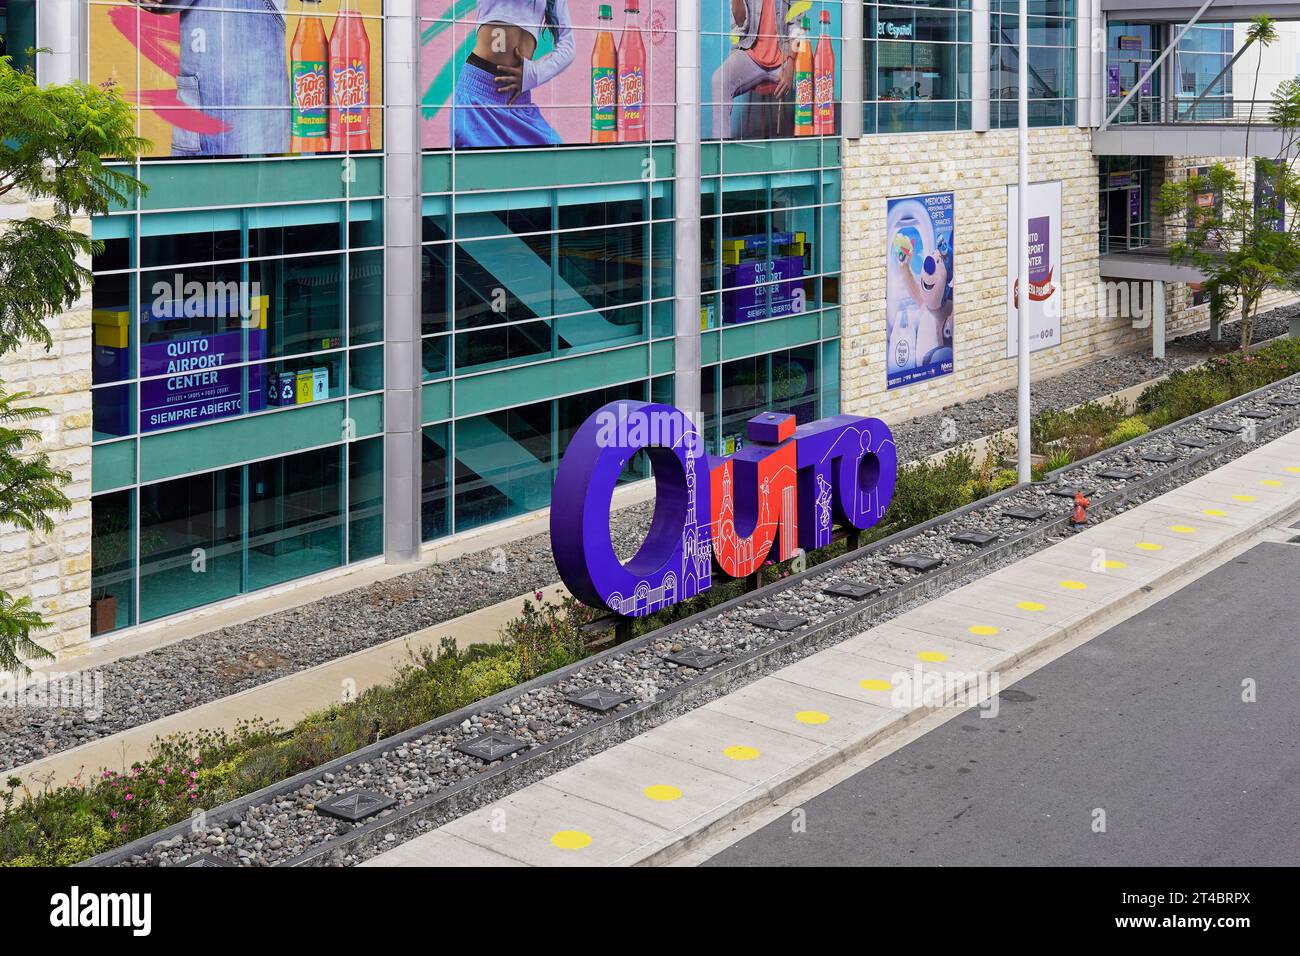 A large Quito sign at Ecuador's capital city Quito's Airport.  Quito Airport is the gateway to the Galapagos Islands. Stock Photo